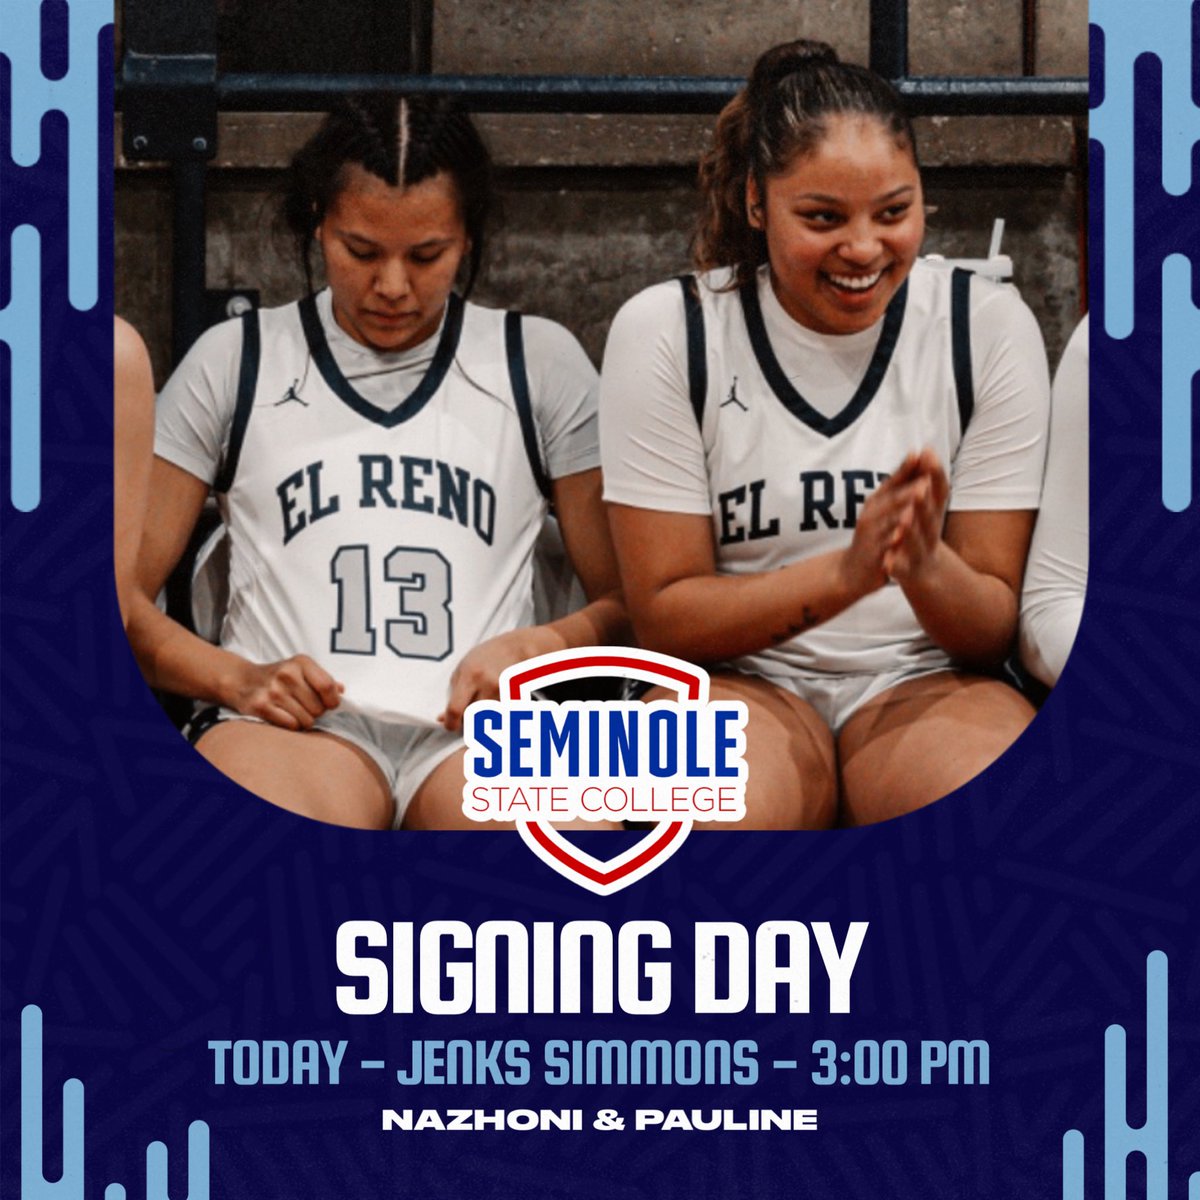 TODAY is SIGNING DAY for these two seniors!! Come out to Jenks Simmons today at 3 pm to celebrate these young ladies! We are so excited for Nazhoni and Pauline. We know you ladies will kill it at the next level! @paulinee_bh @nazhonisleeper #Goddid #statechamps